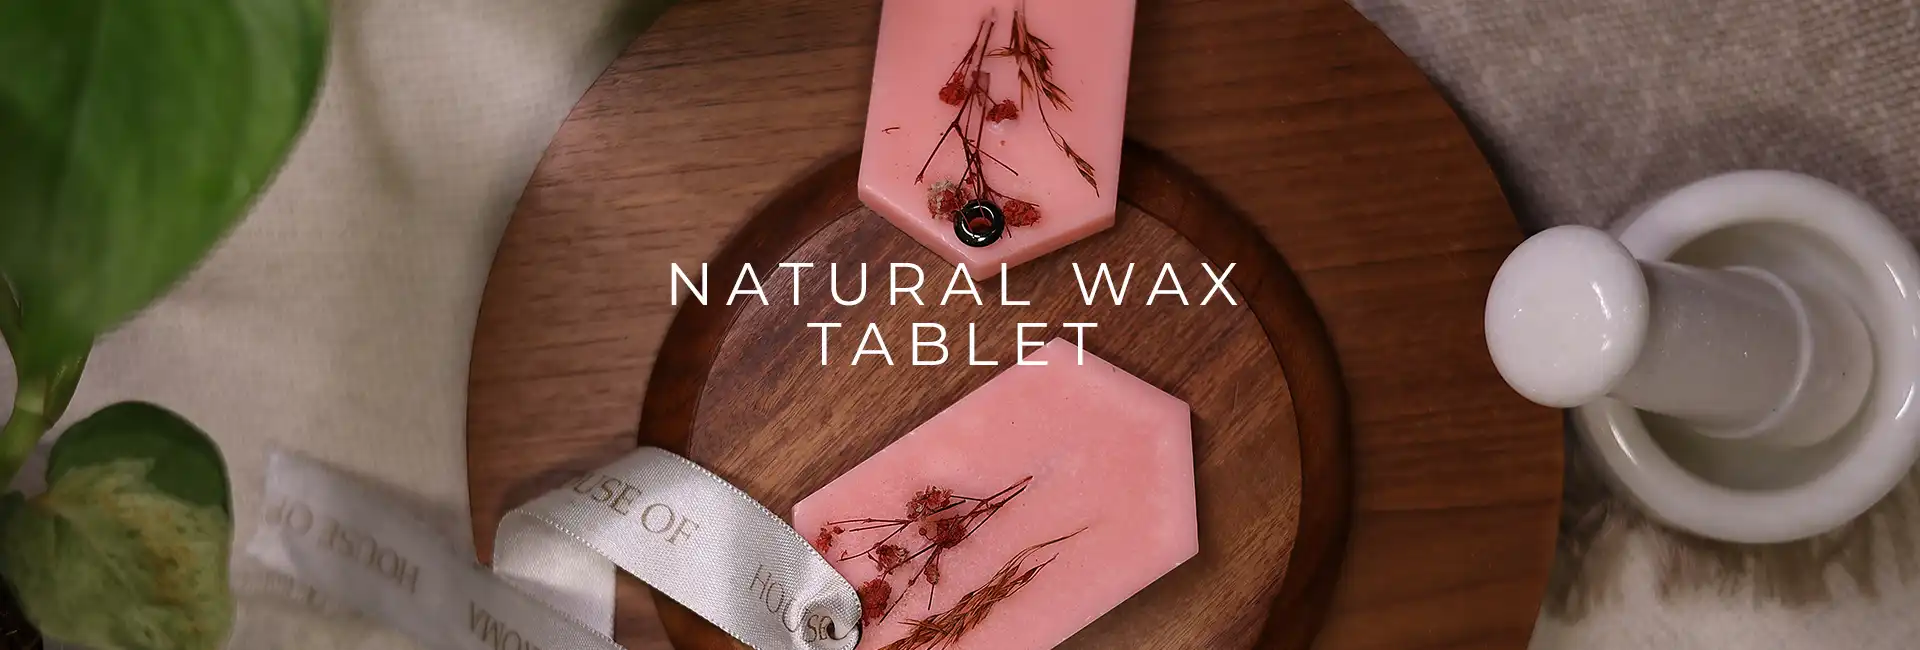 Buy Organic Natural Wax Tablet Online for Wardrobes